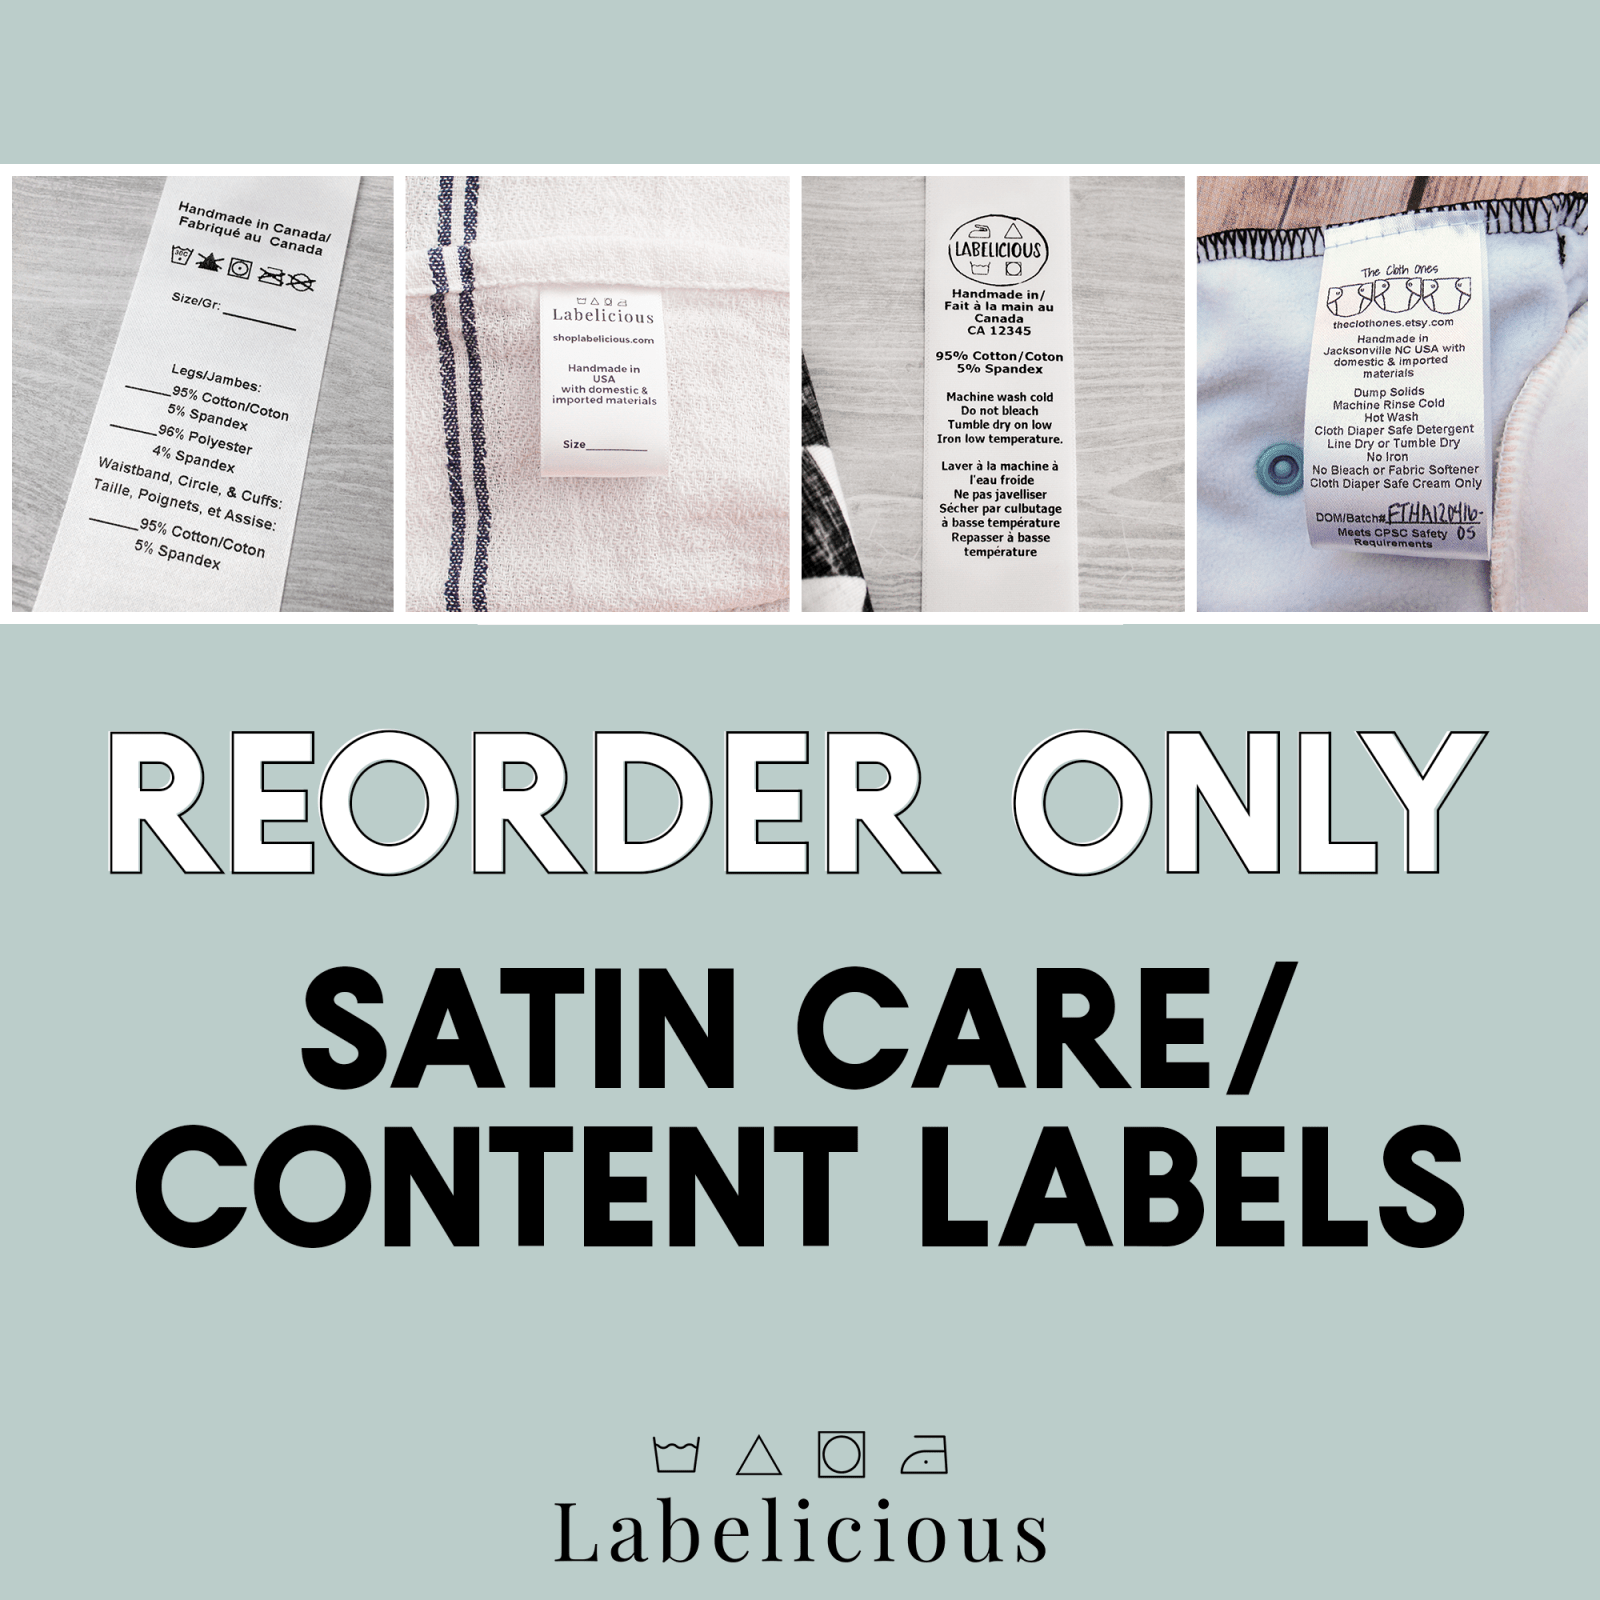 re-order-only-satin-carecontent-labels-764971.png